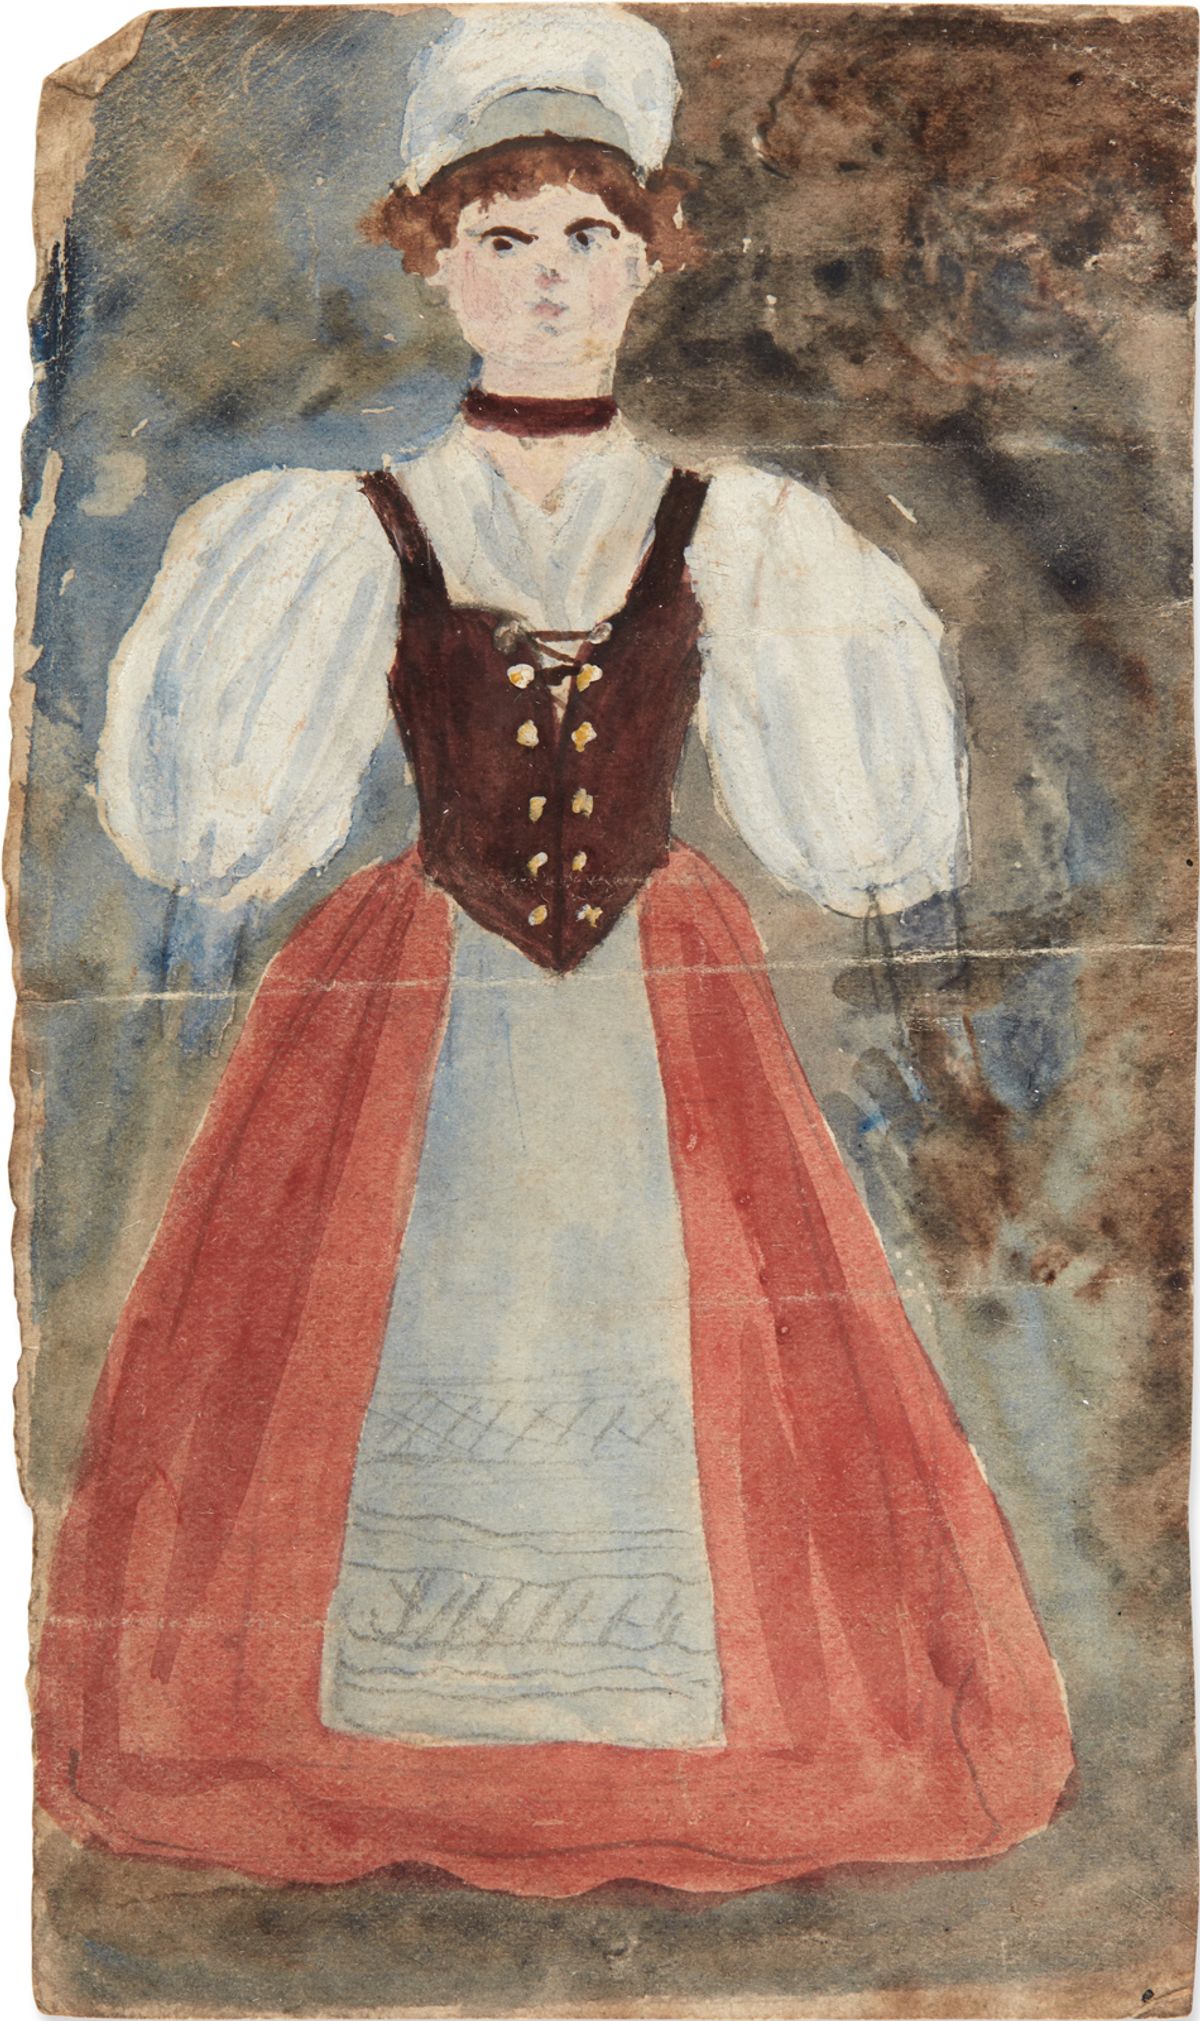 Charlotte Brontë Juvenile watercolour portrait of a Glass Town peasant woman (around 1828) Image: courtesy of Sotheby's